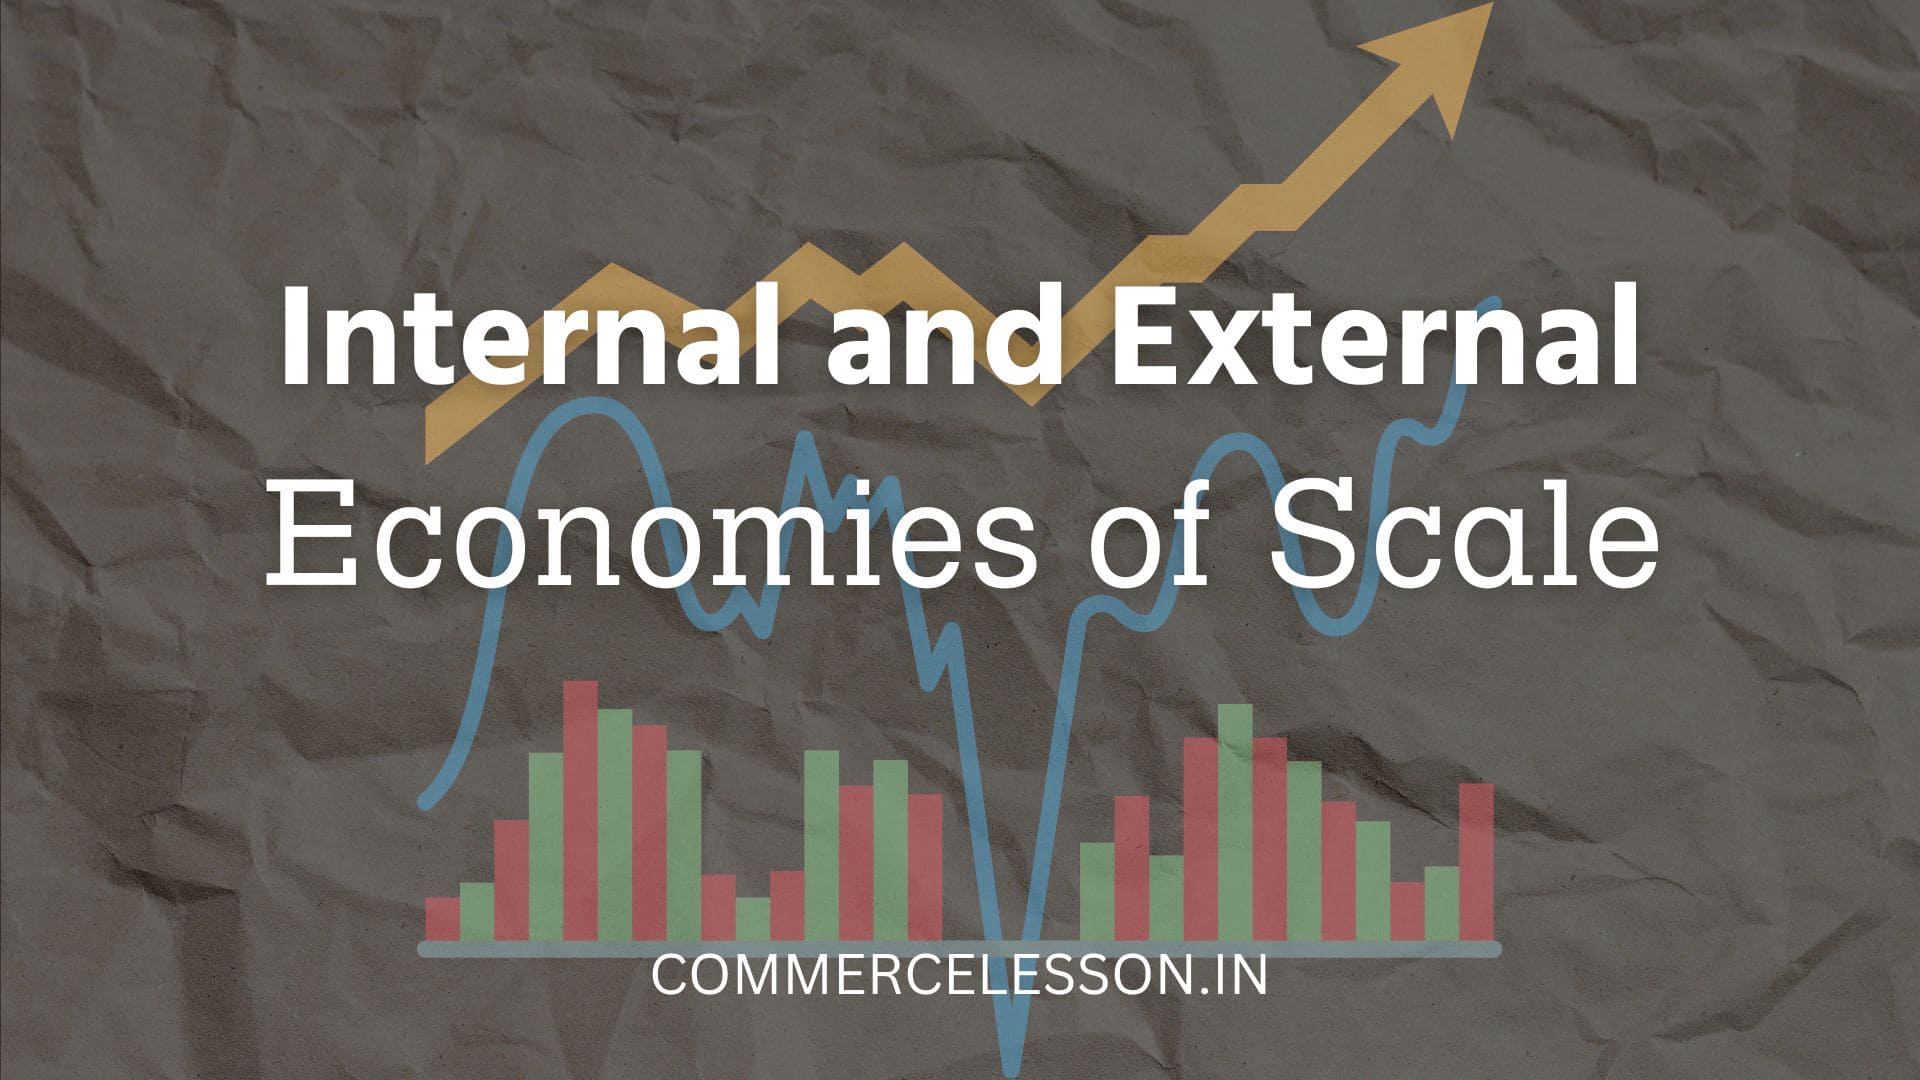 Internal and External Economies of Scale